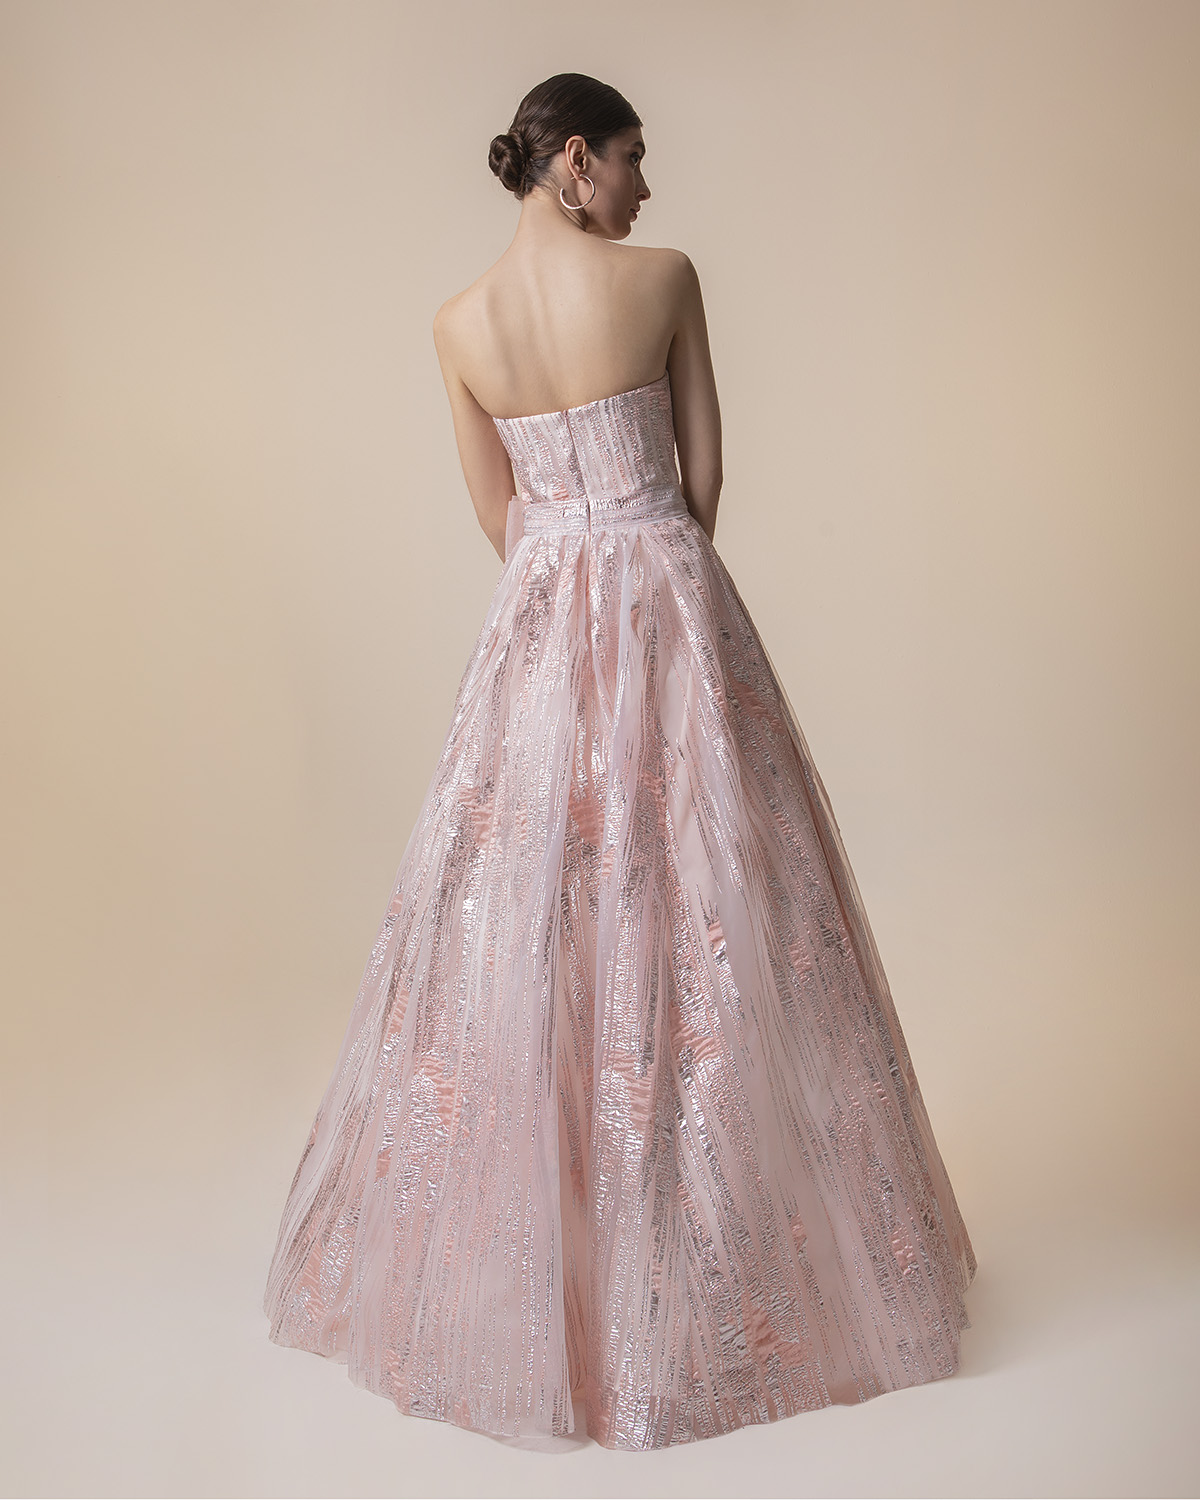 Long strapless evening dress with shining fabric and a big bow on the waist